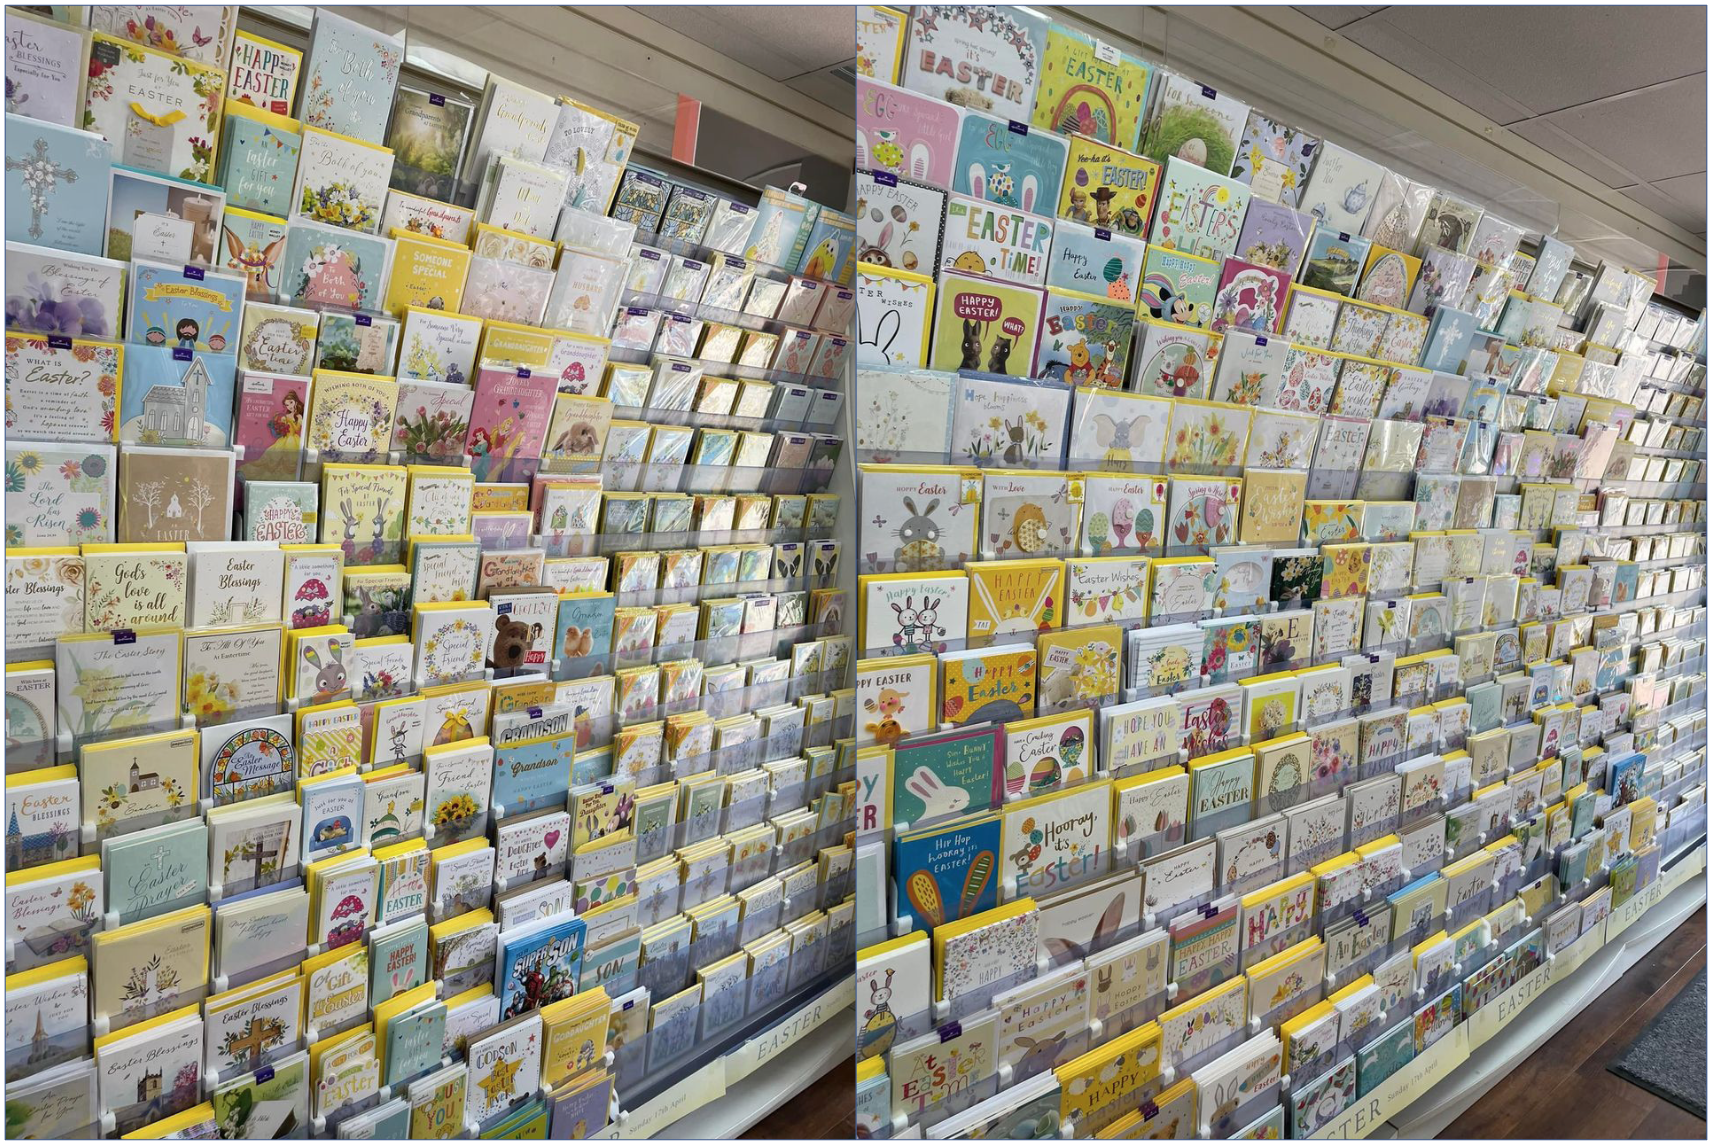 Above: Wall of cards – the full Easter display at Dee’s Cards